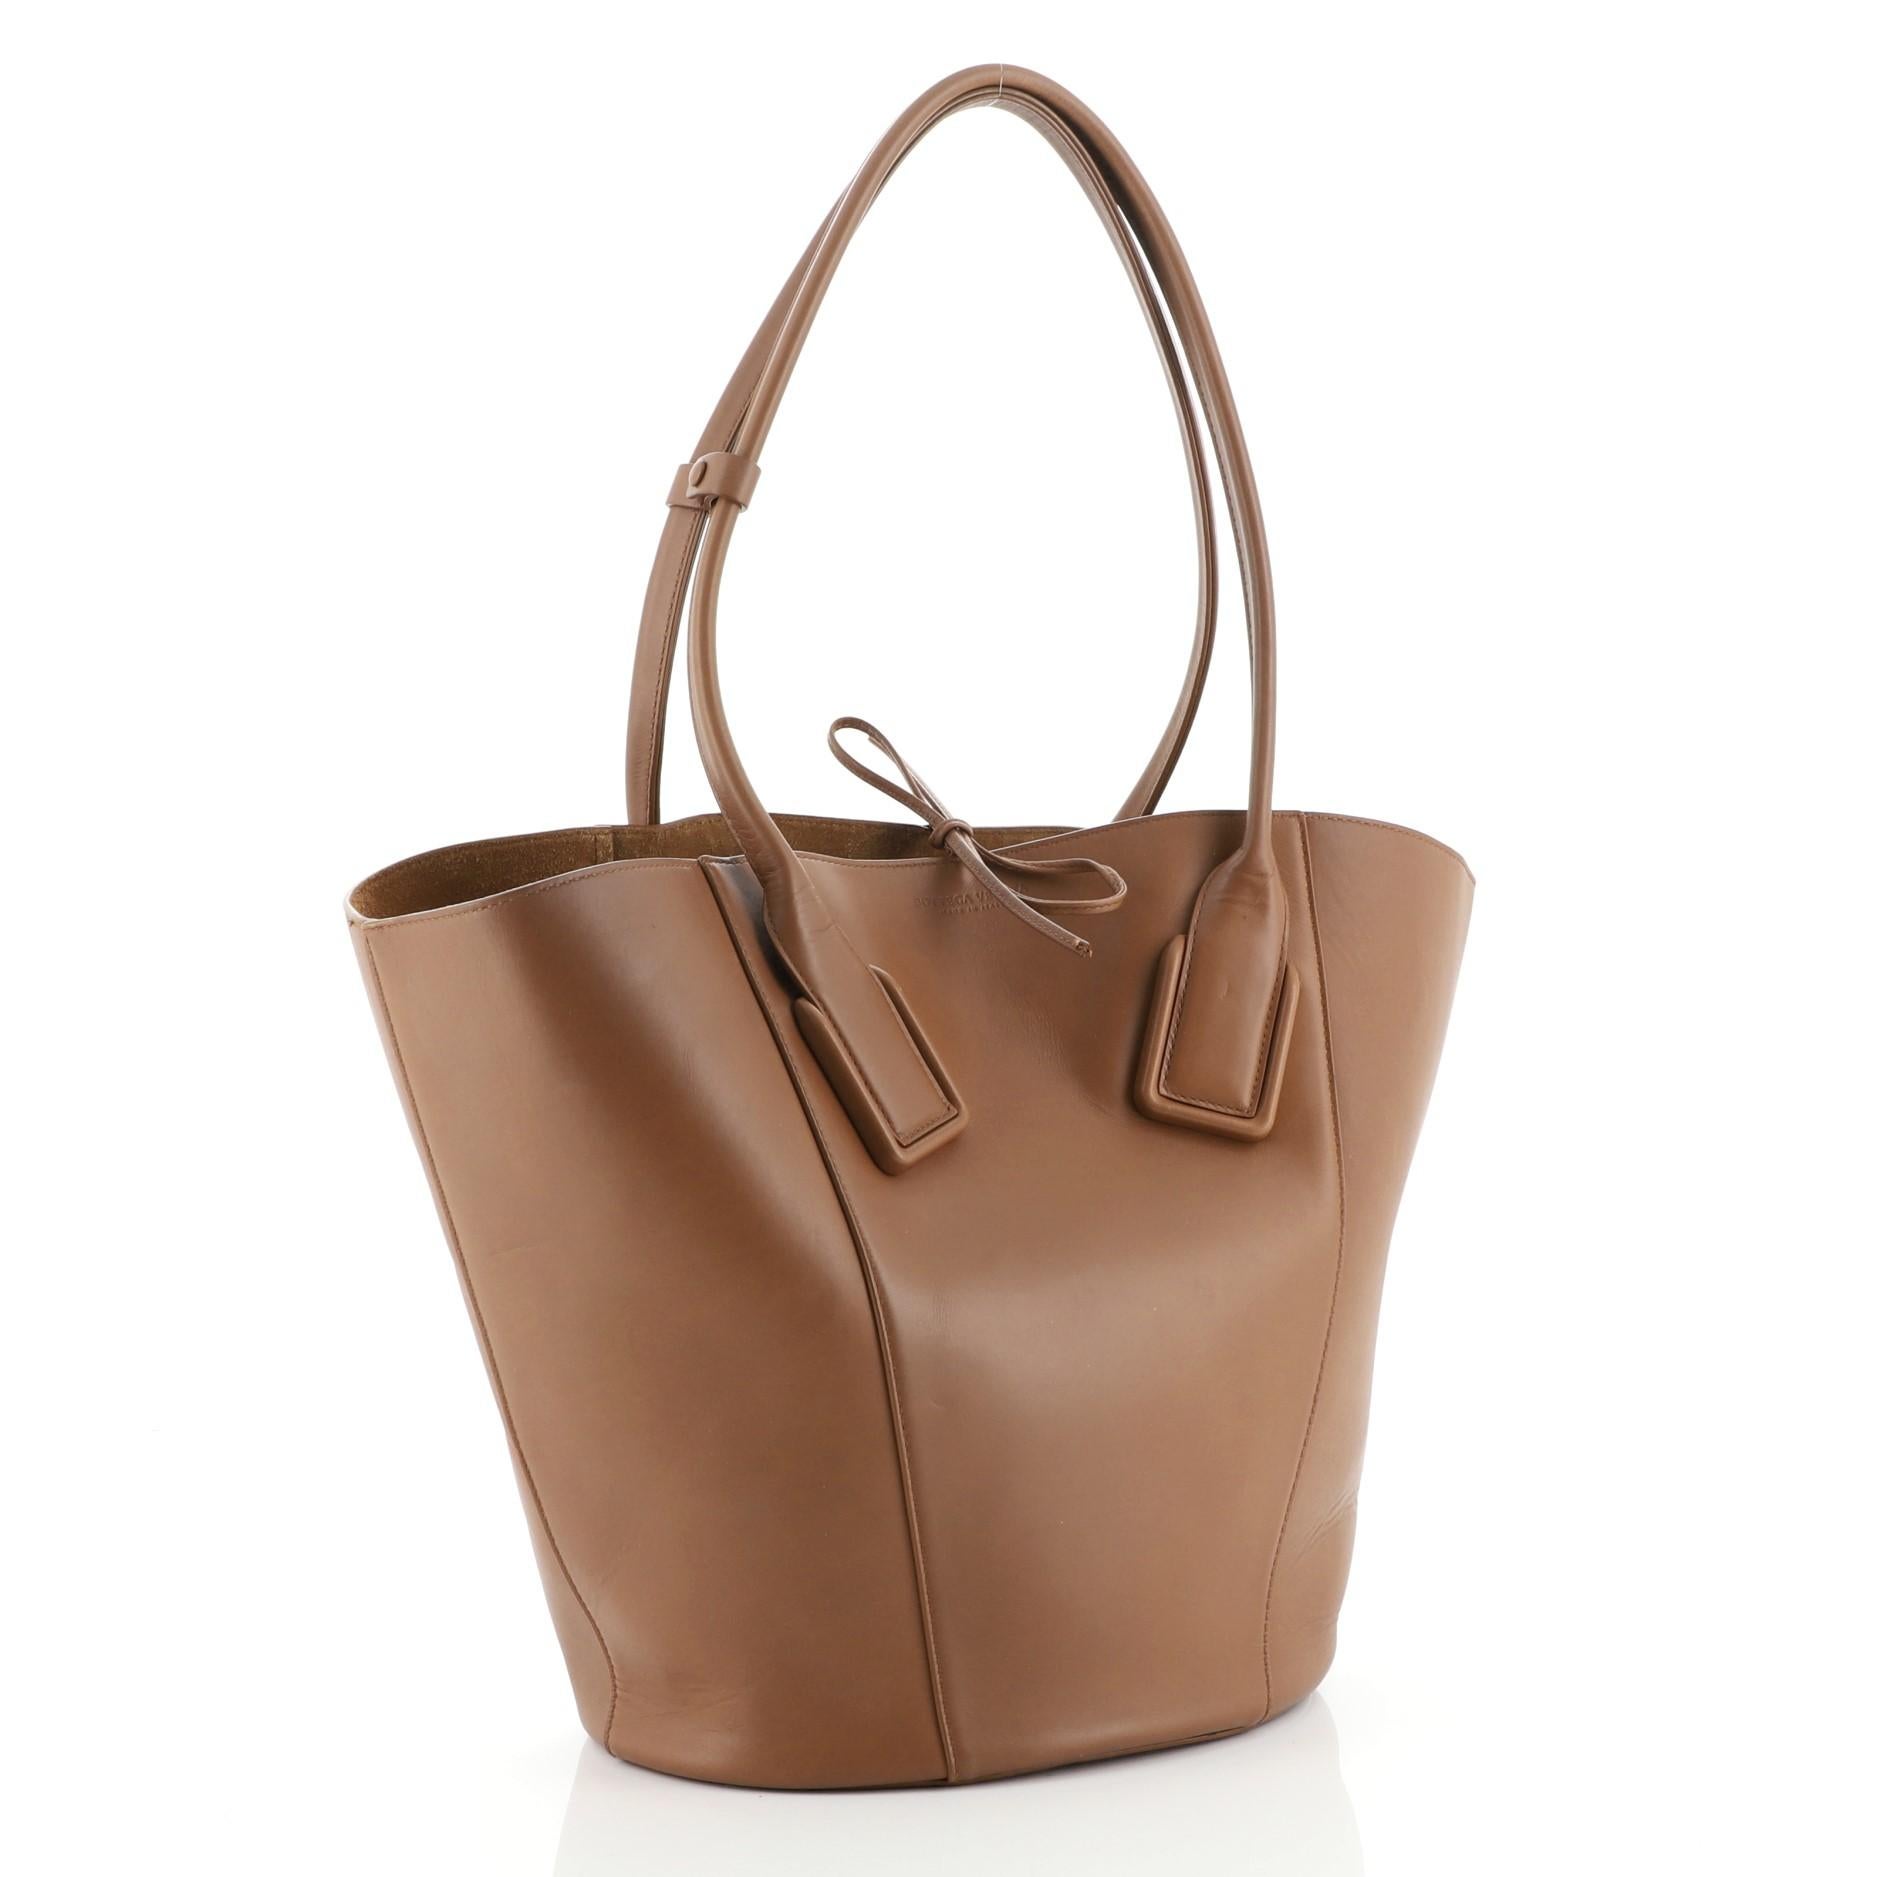 Bottega Veneta Basket Tote Leather Large
Brown

Condition Details: Loss of shape on exterior. Moderate scuffs on exterior, marks on base. Light wear on opening trim, darkening in interior, scratches on hardware.

49951MSC

Height 13